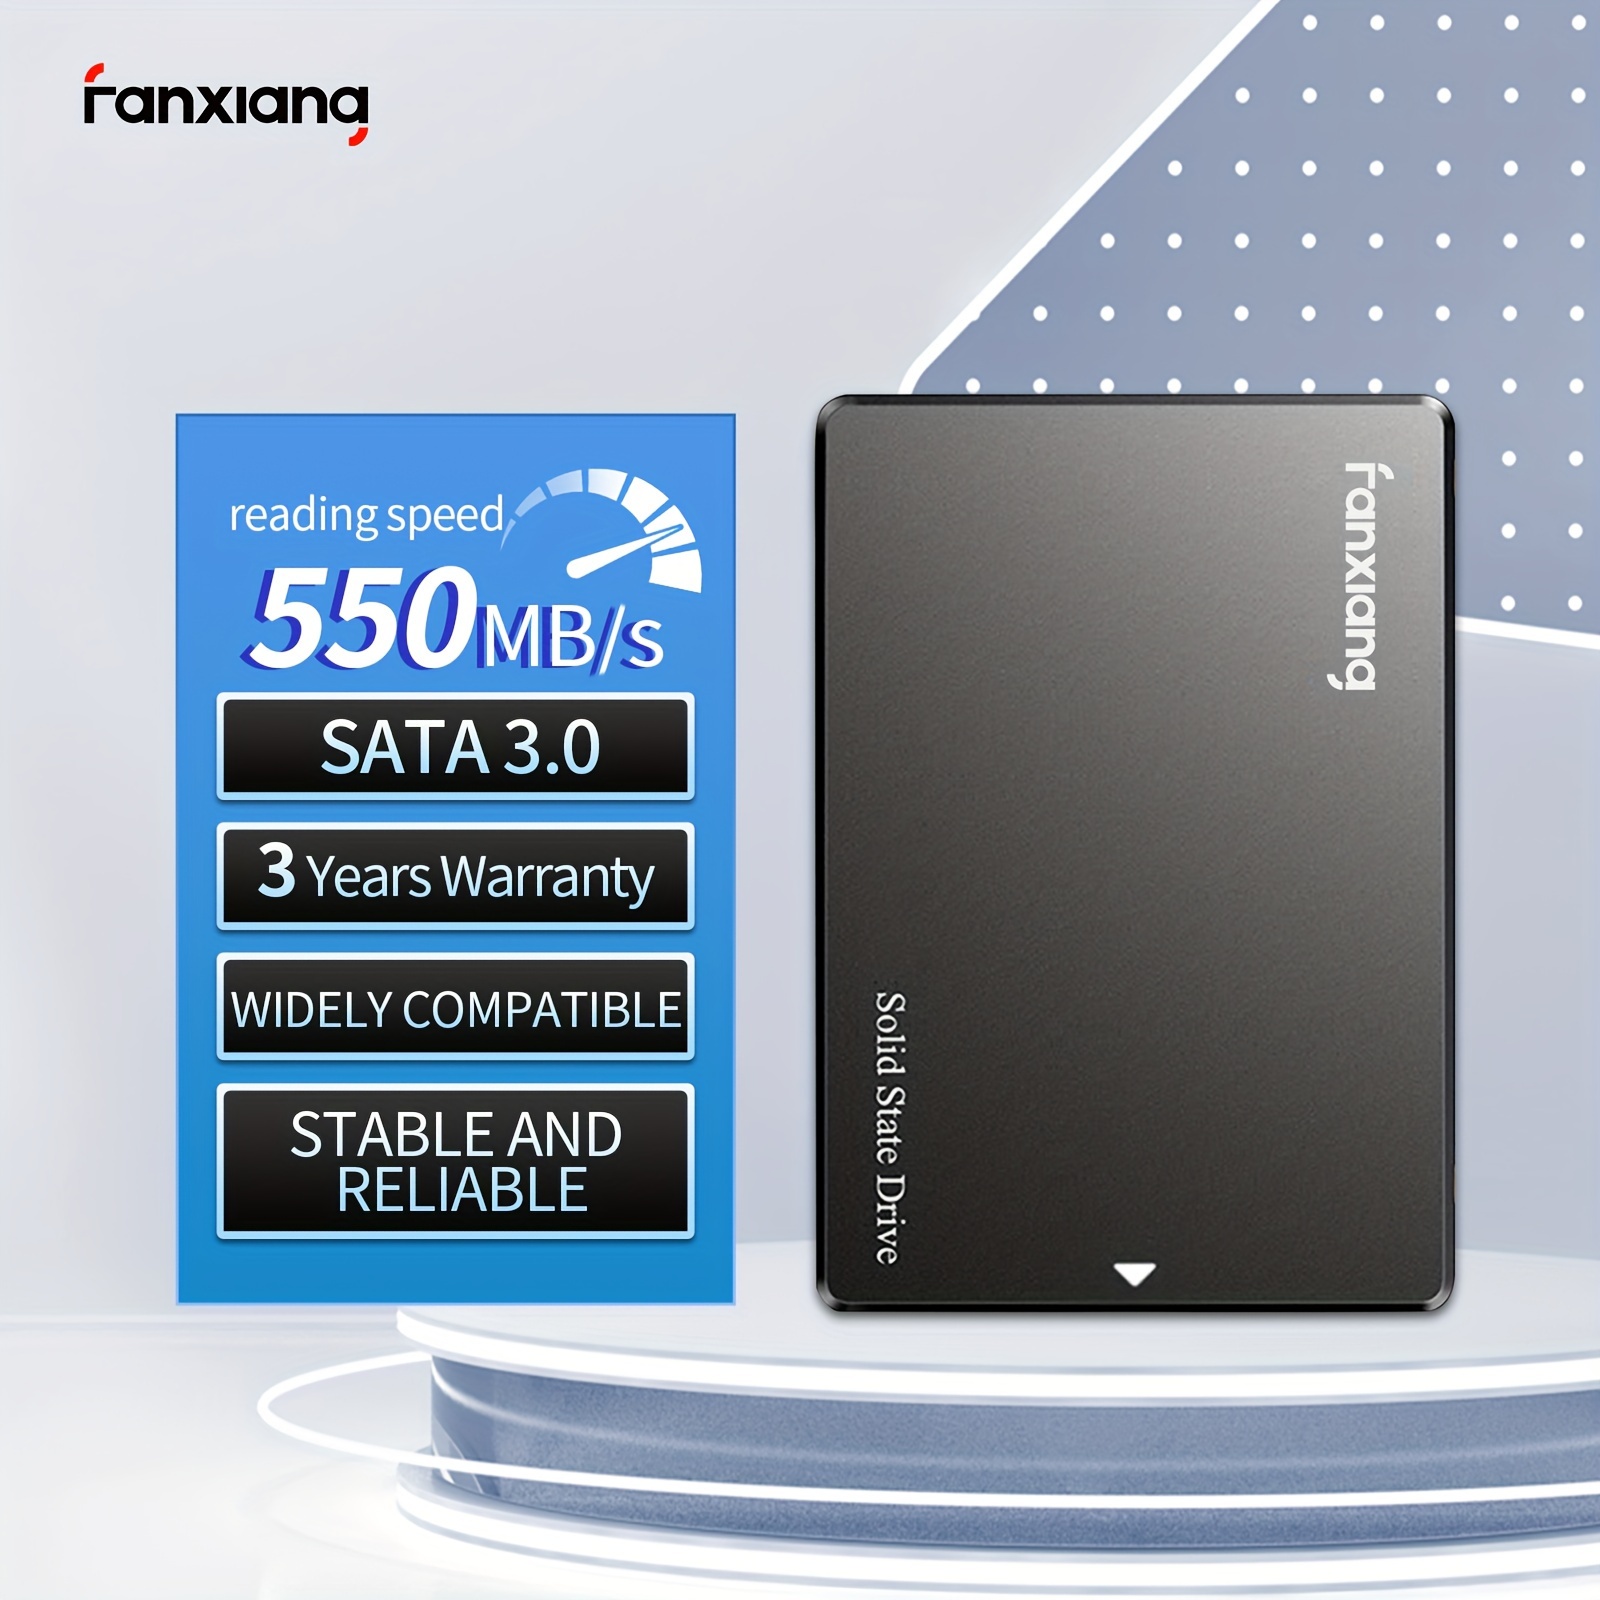 Fanxiang S101 512GB SSD 2.5 inches SATA III Internal Solid State Hard  Drive, up to 550MB/s 